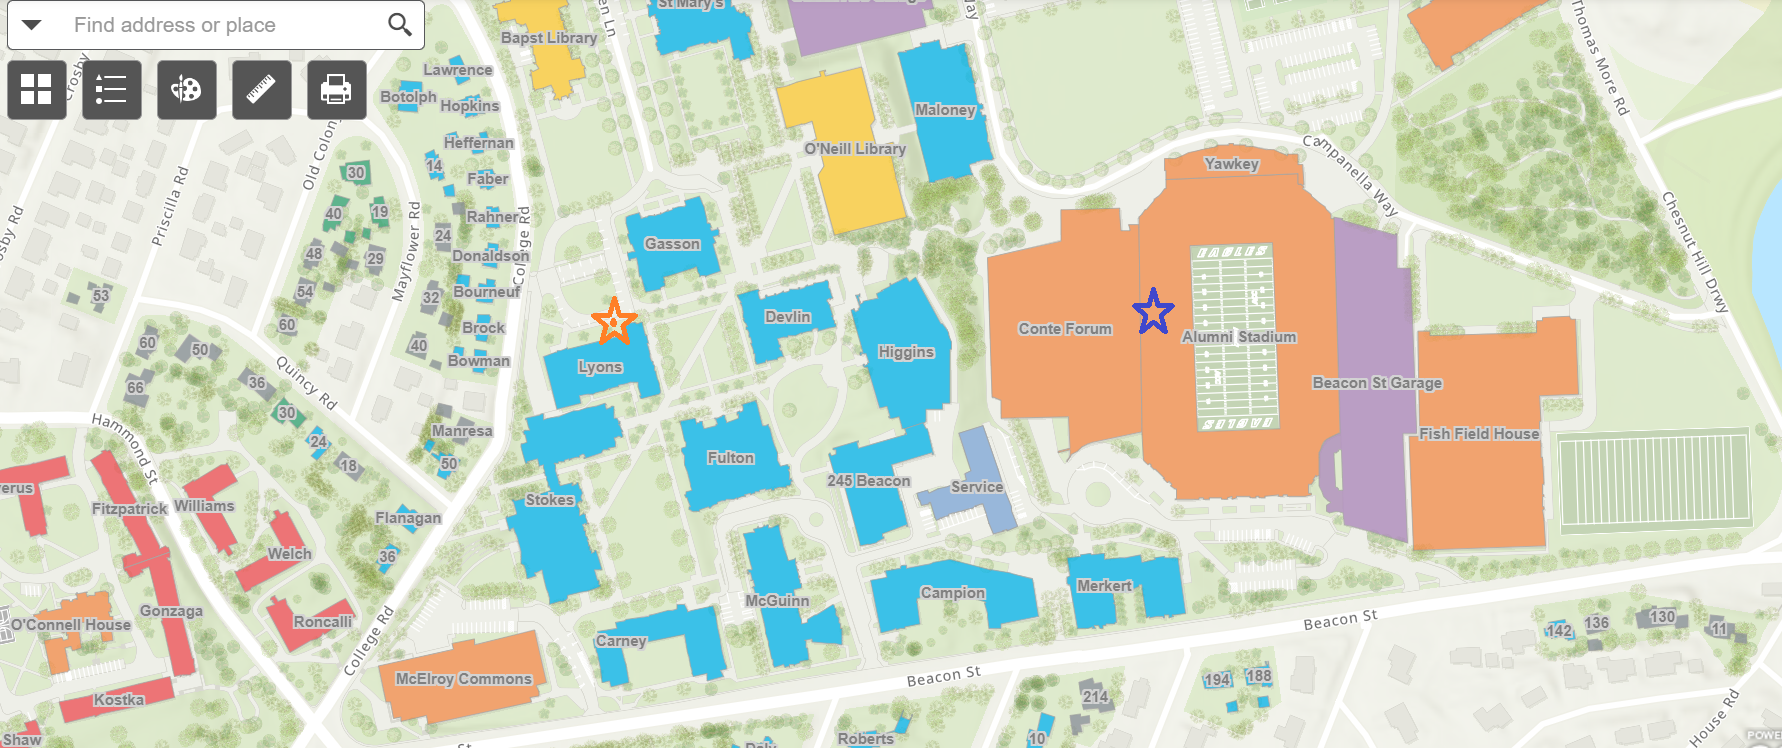 map of the Boston College tailgate location and Stadium